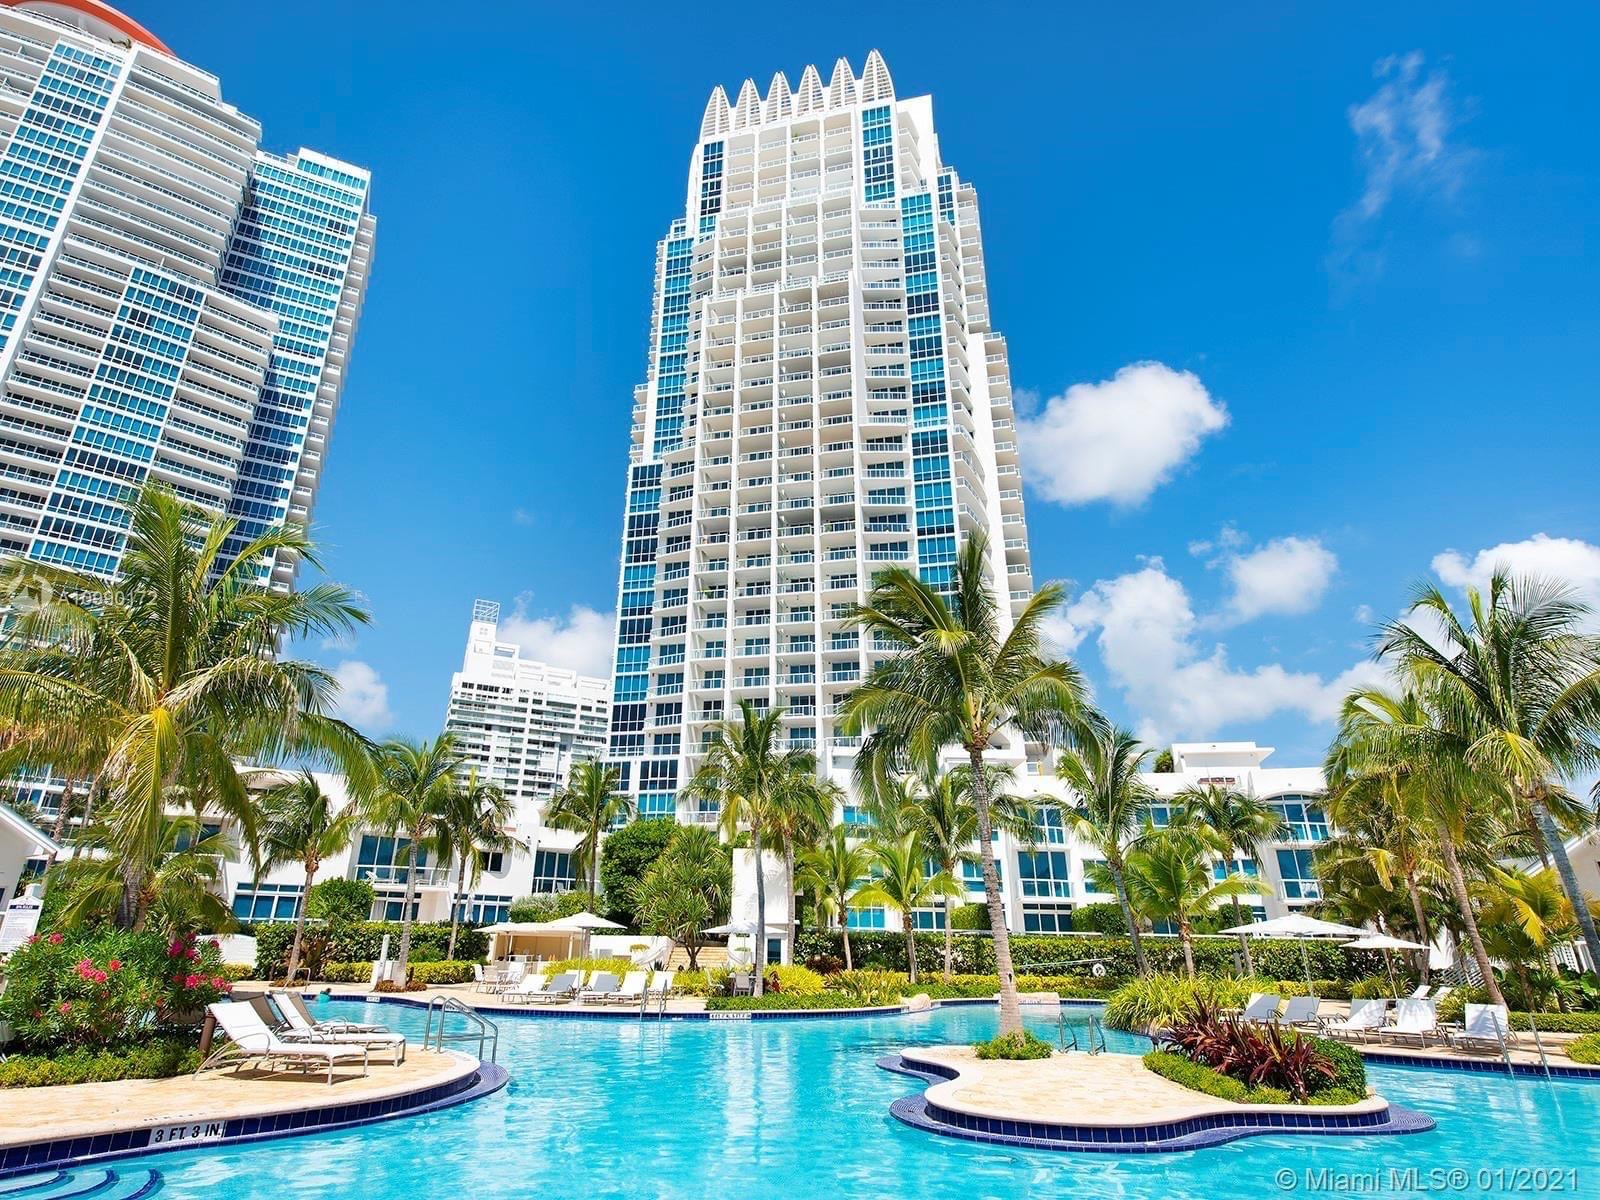 Explore All That Continuum in South Beach Has to Offer'